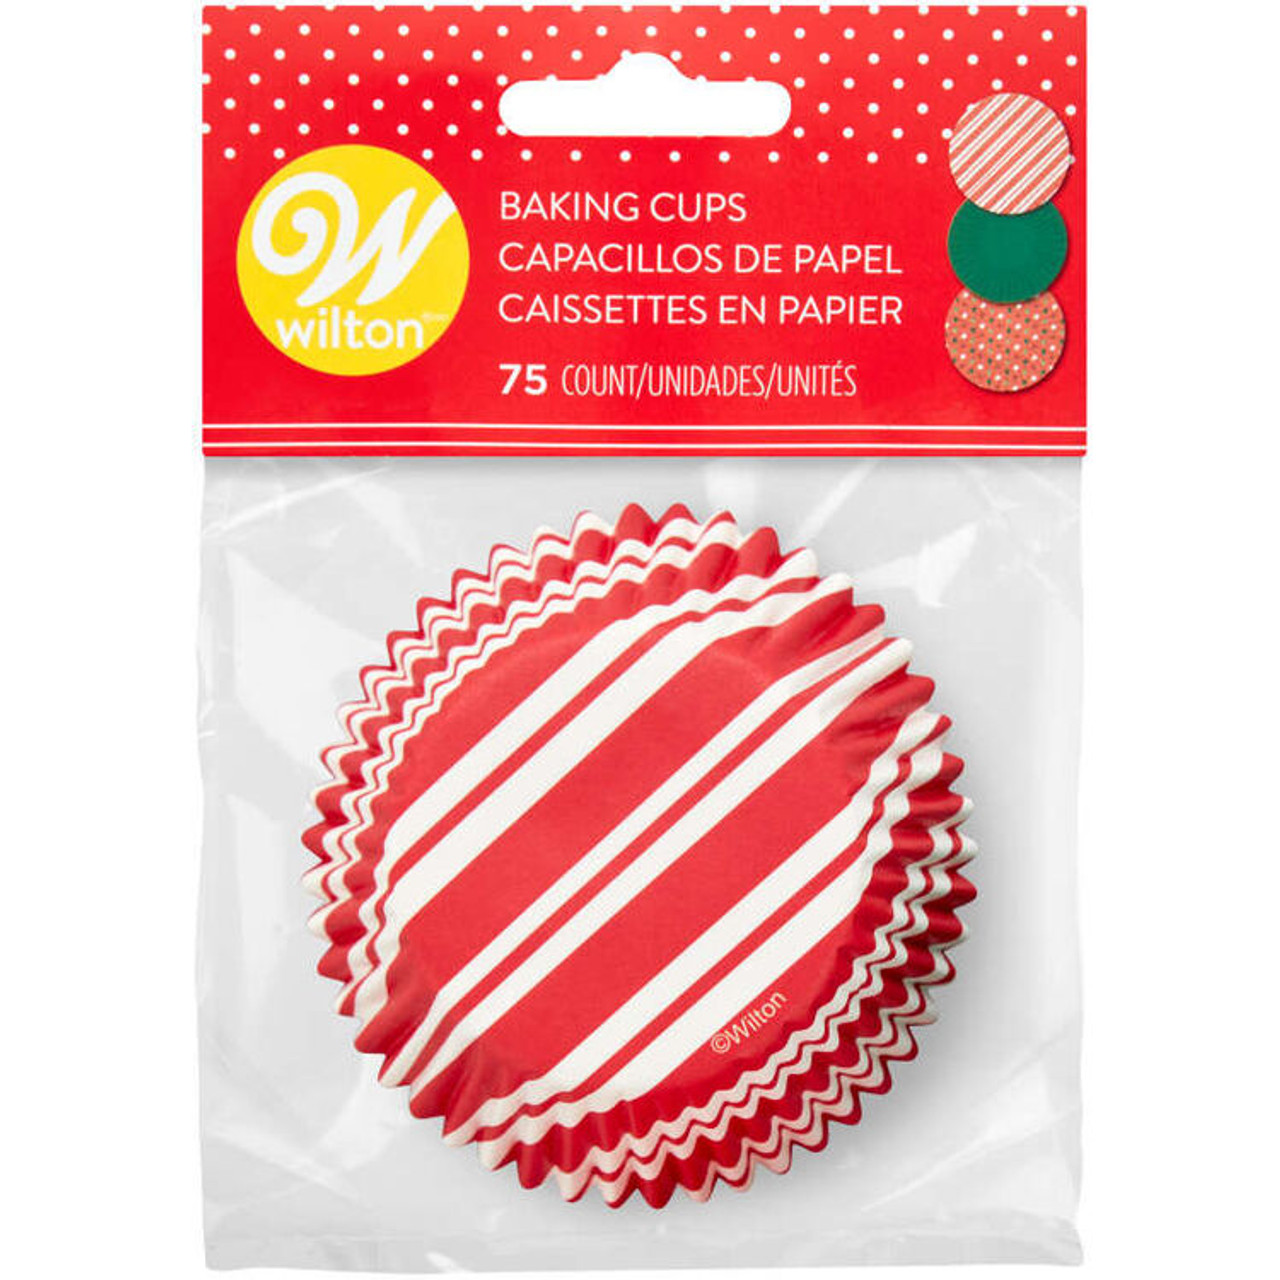 https://cdn11.bigcommerce.com/s-w8h1g5/images/stencil/1280x1280/products/13259/36444/191010576-Wilton-Red-Green-and-White-Patterned-Paper-Christmas-Cupcake-Liners-75-Count-M__50206.1670208098.jpg?c=2